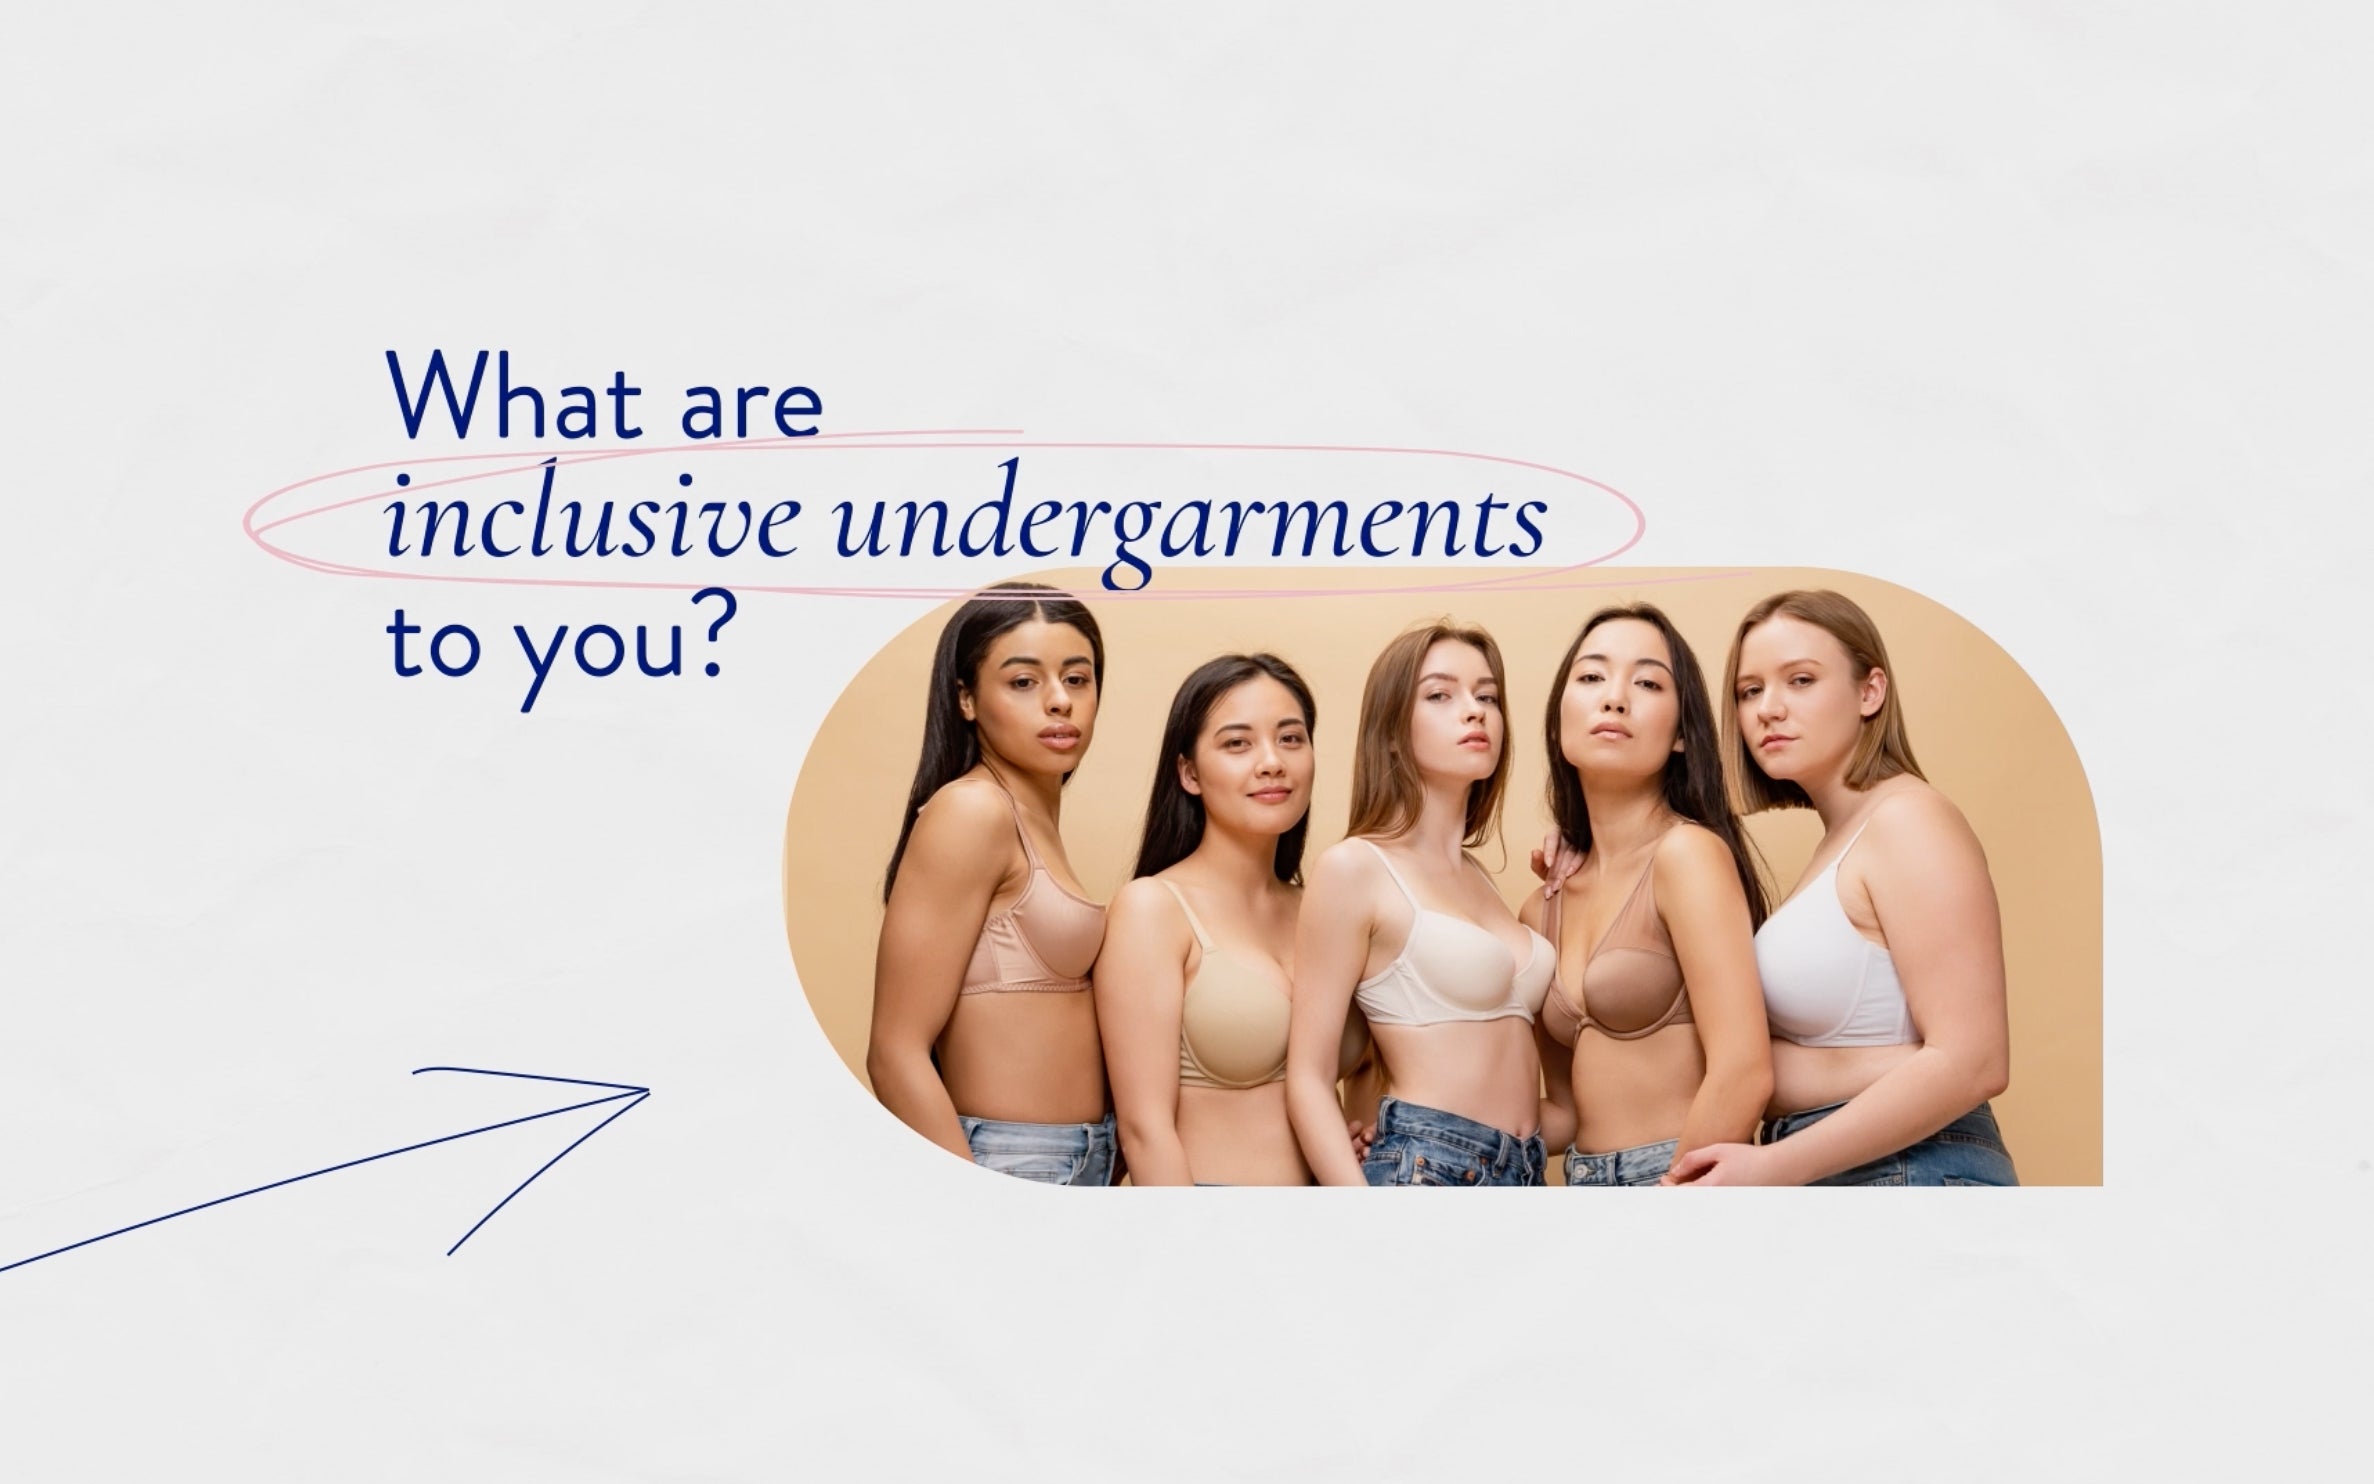 What are inclusive undergarments to you?